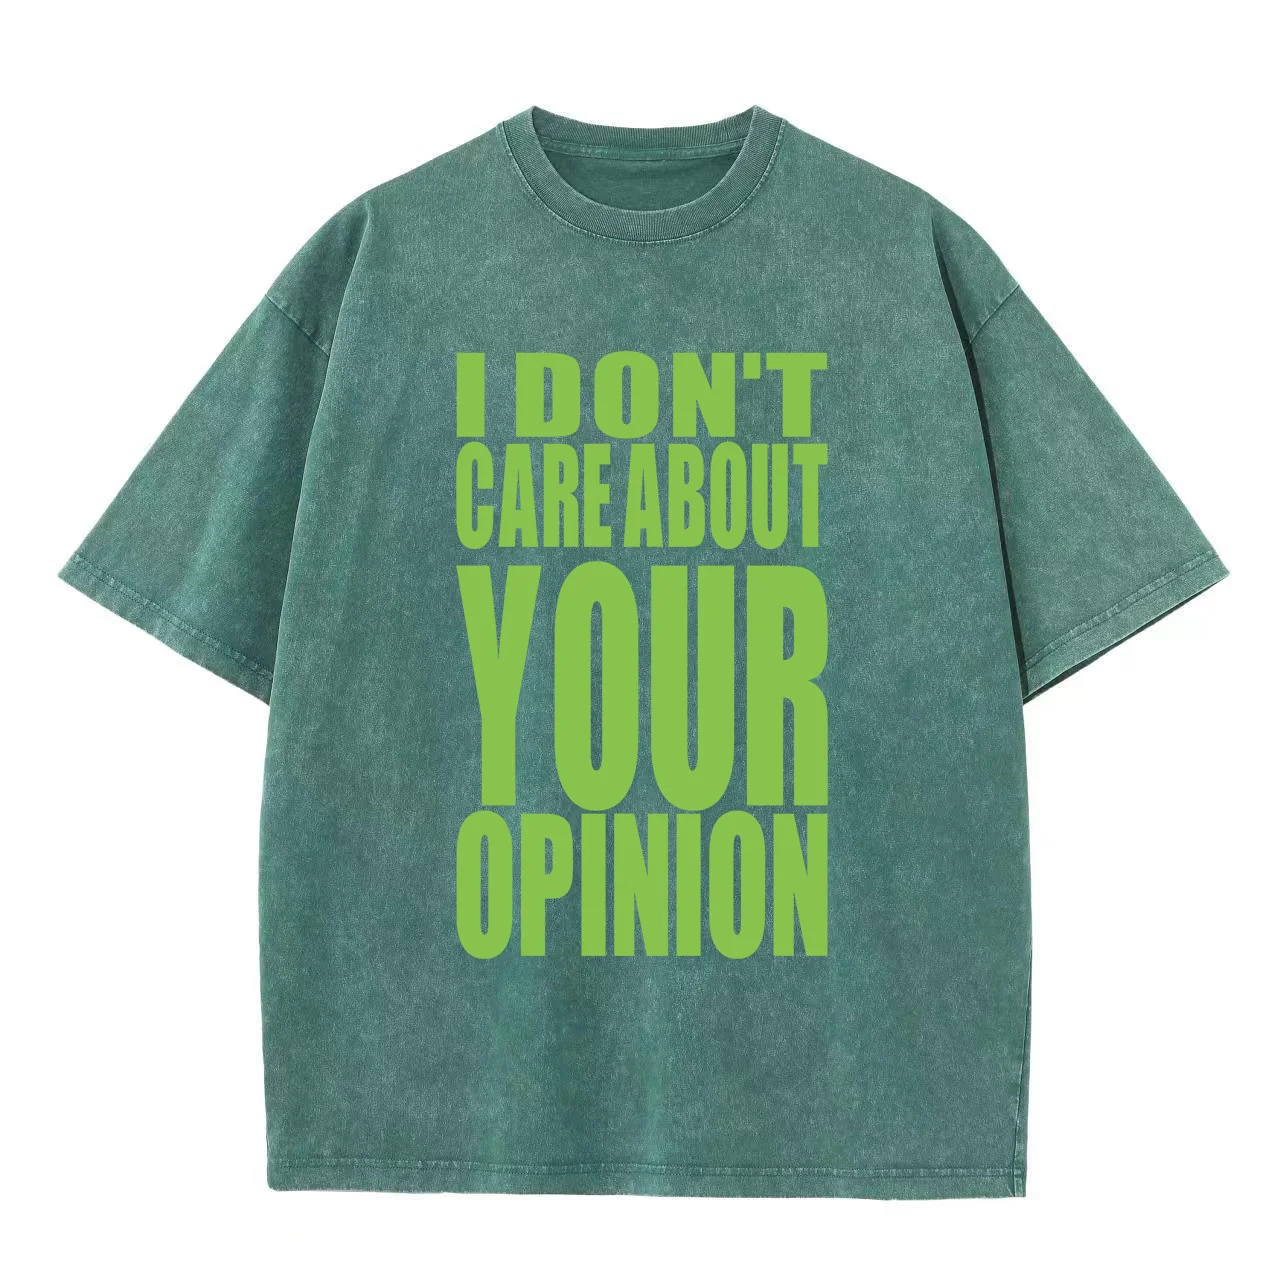 

I Don'T Care About Your Opinion Tshirts Men Streetwear Cotton Tshirt Fashion O-Neck T-Shirts Fashion Loose Cool Male T-Shirt